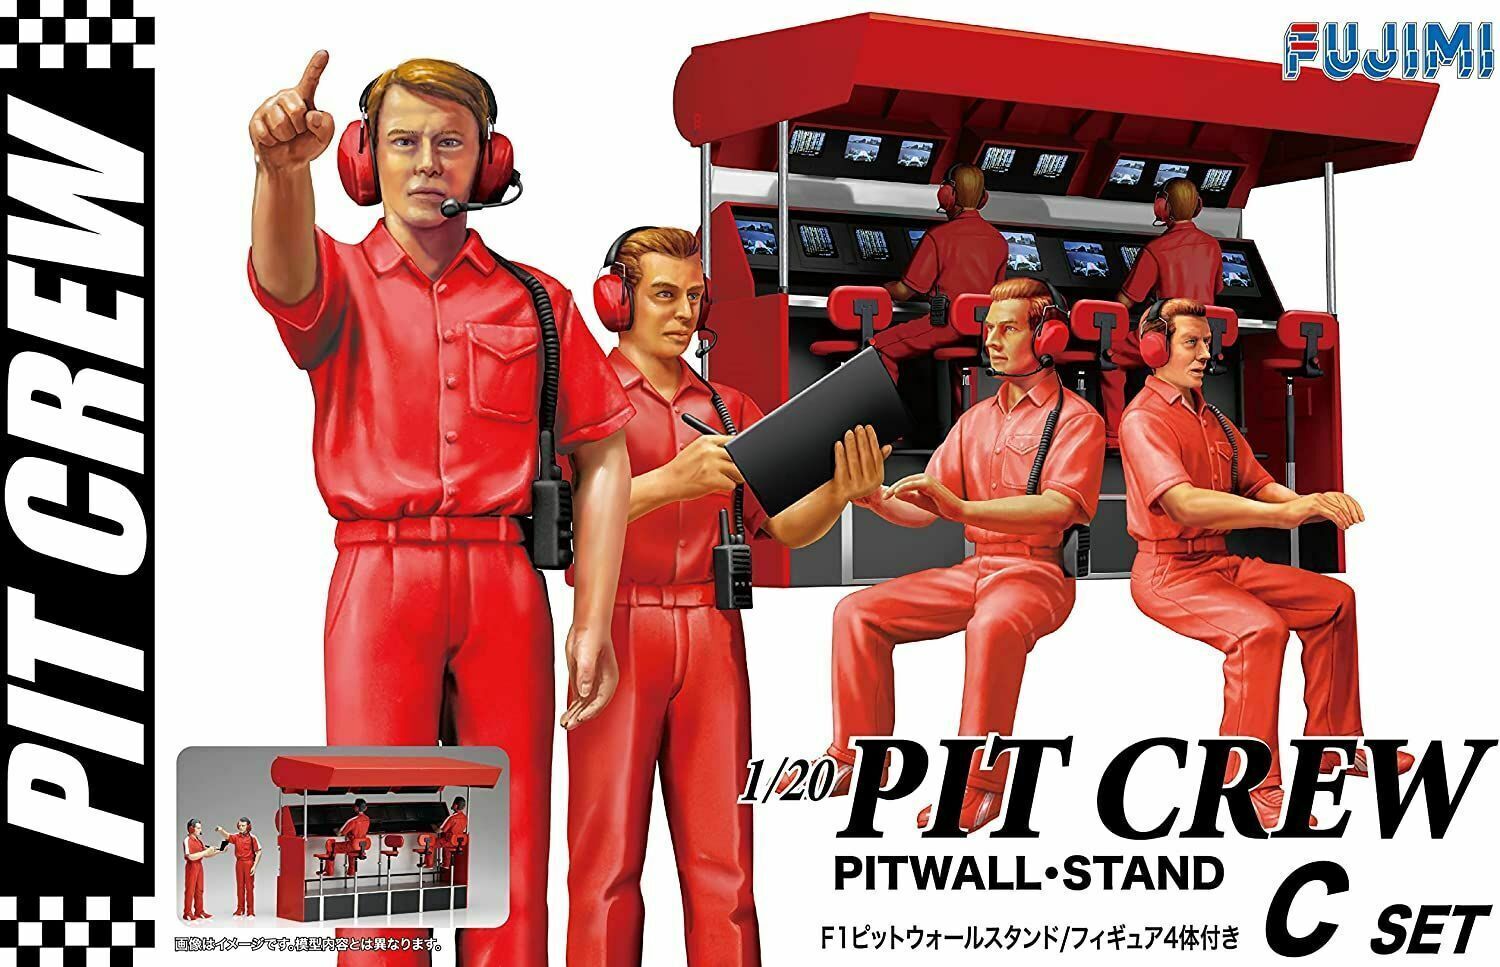 Pit Crew and Pit Wall